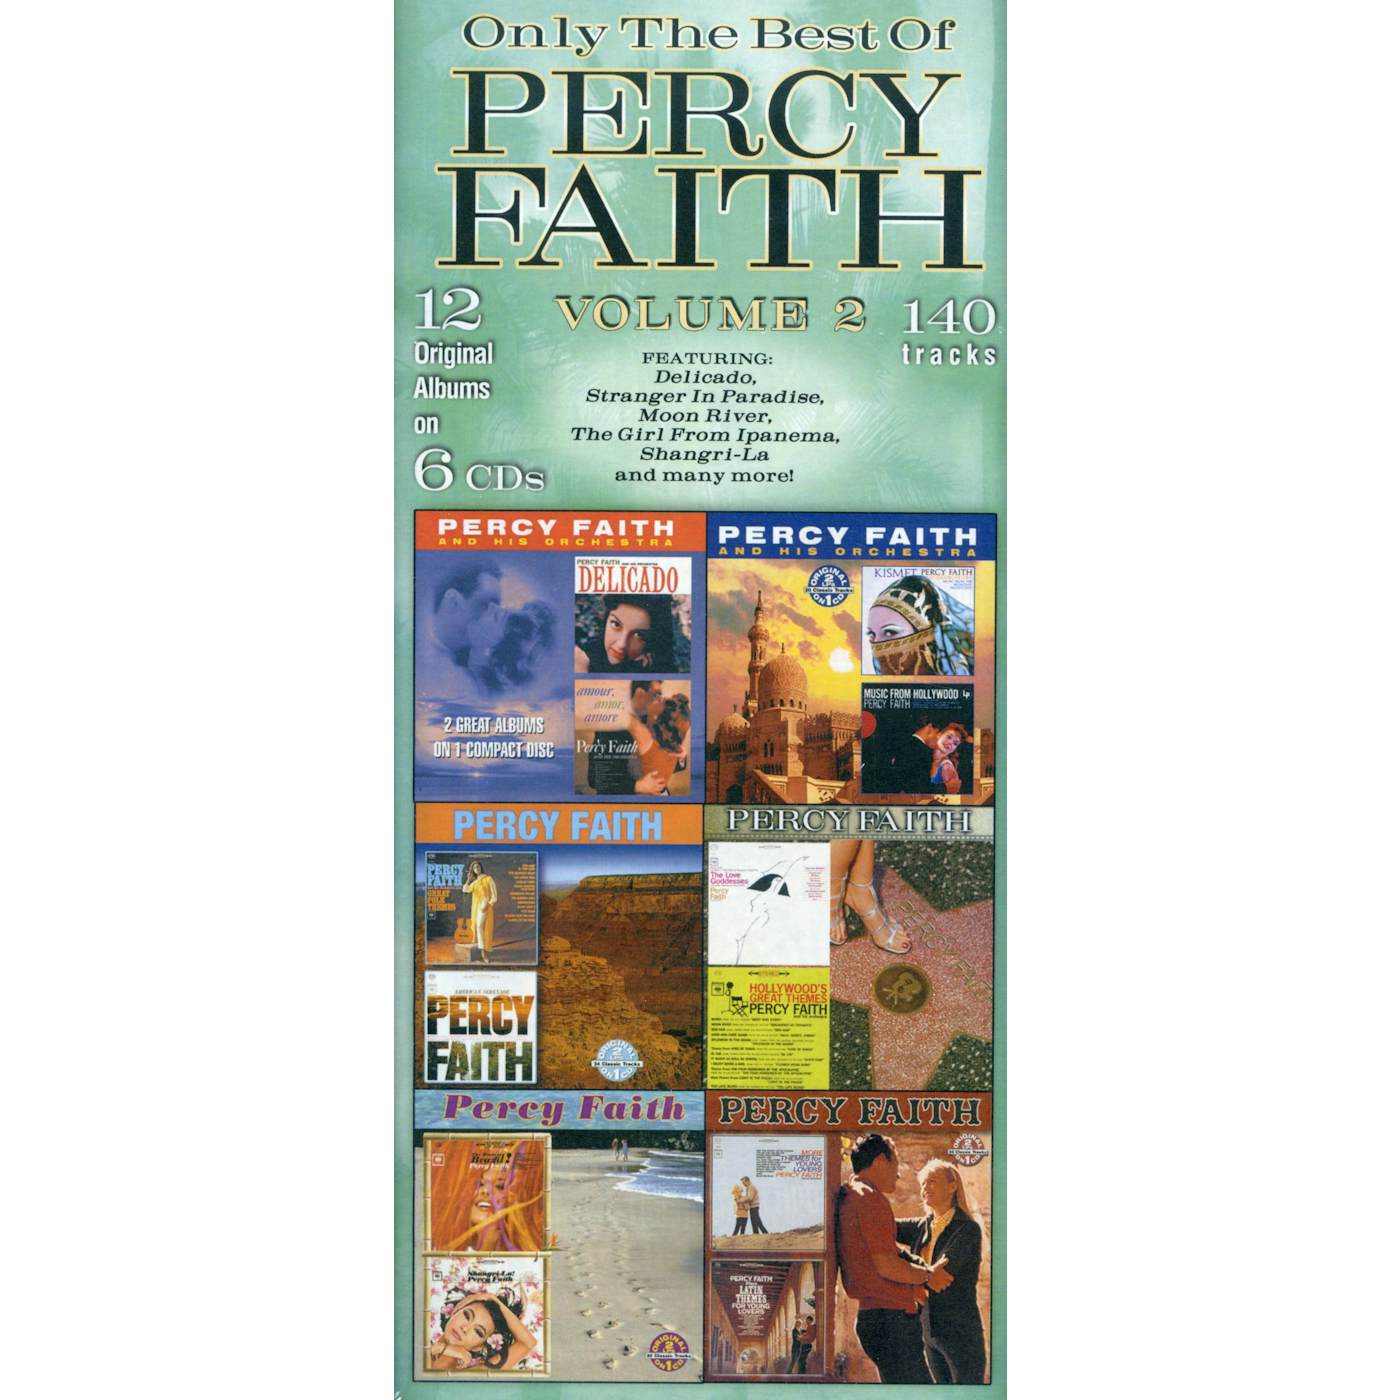 ONLY THE BEST OF PERCY FAITH 2 CD